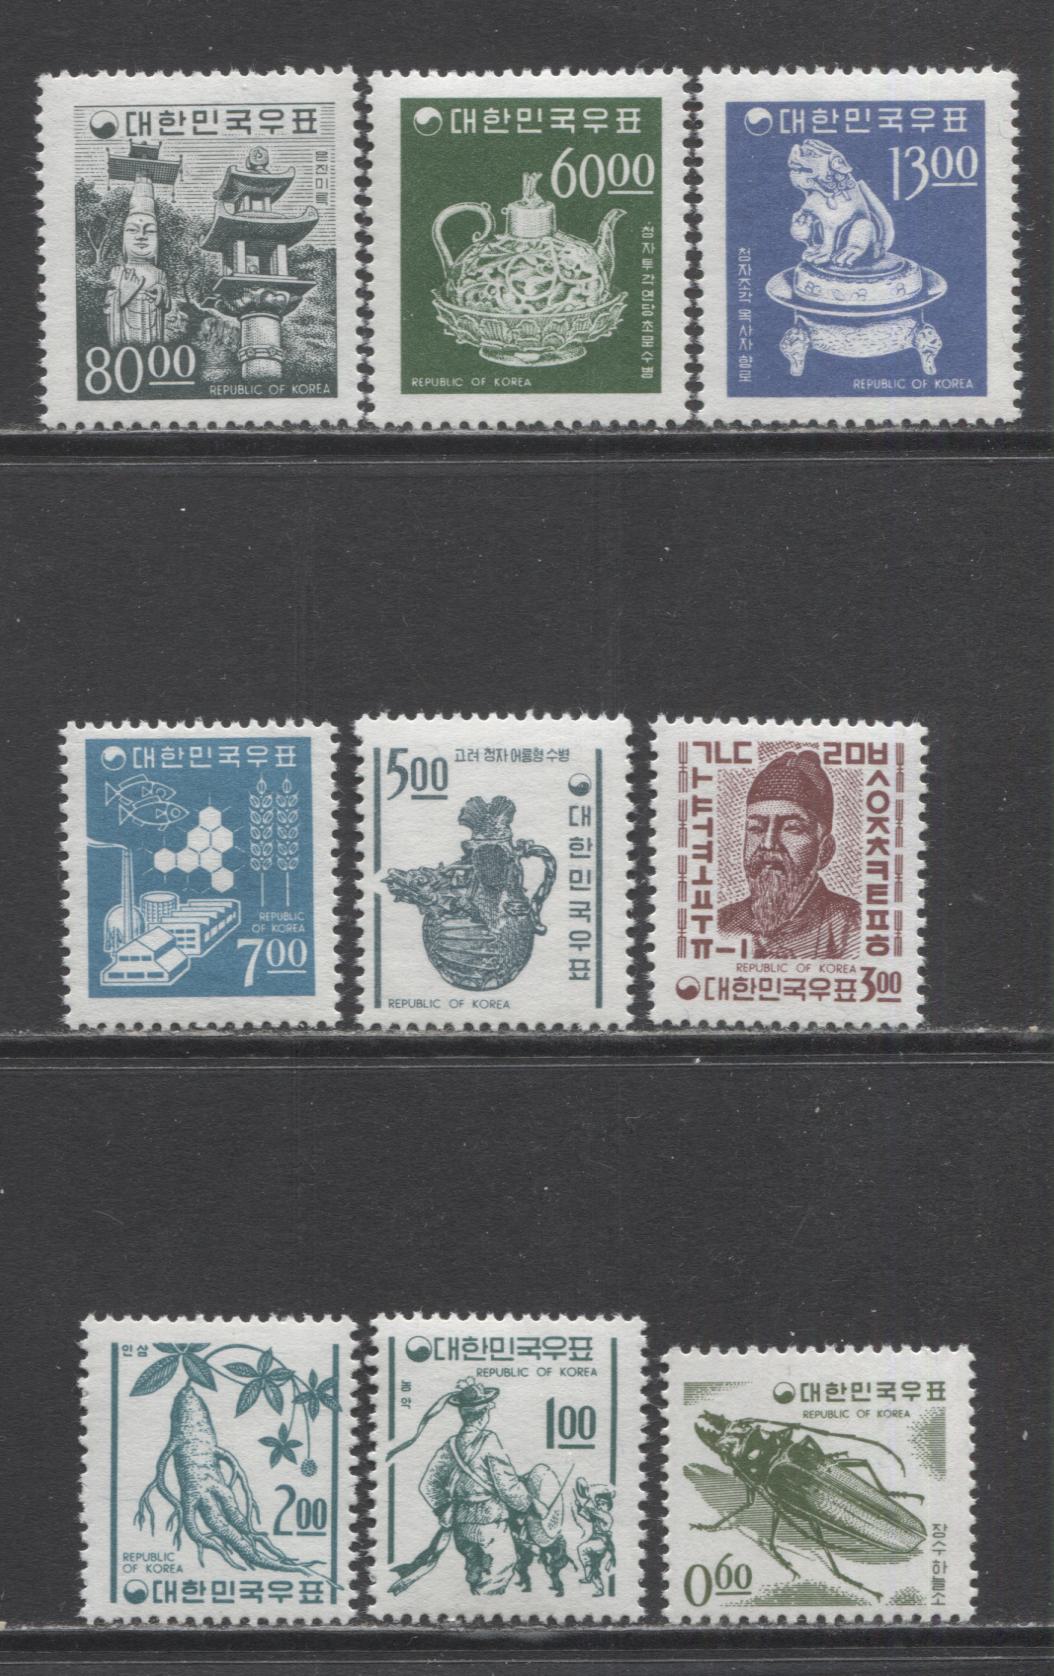 Lot 372 Korea SC#516-525 1966 Definitives, A VFNH Complete Set, 2017 Scott Cat. $63.8 USD, Click on Listing to See ALL Pictures